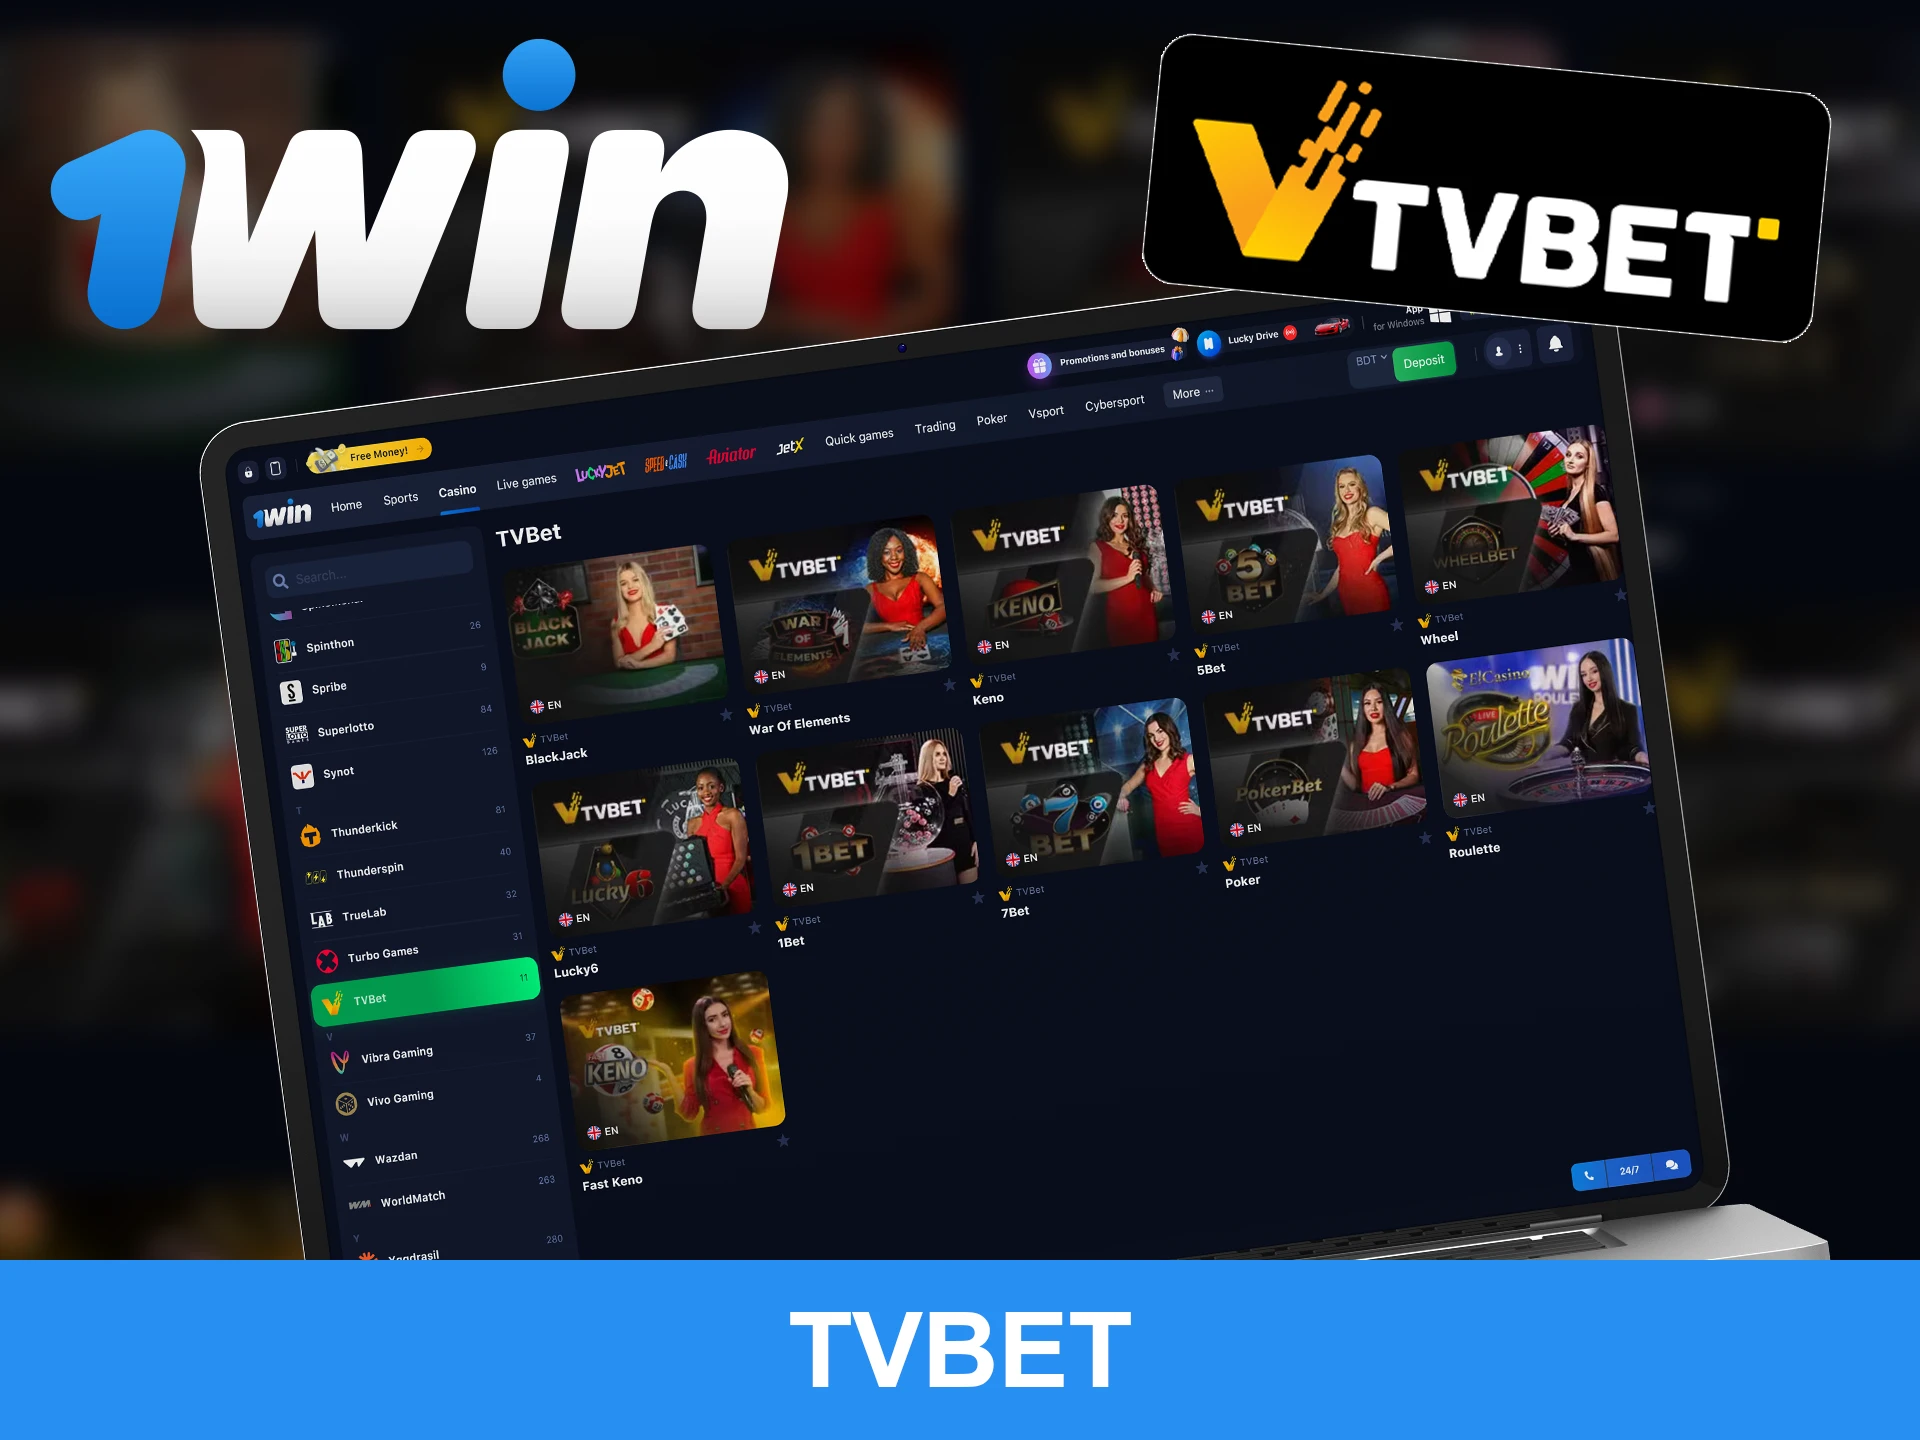 TVBet fans can enjoy their games at 1win.